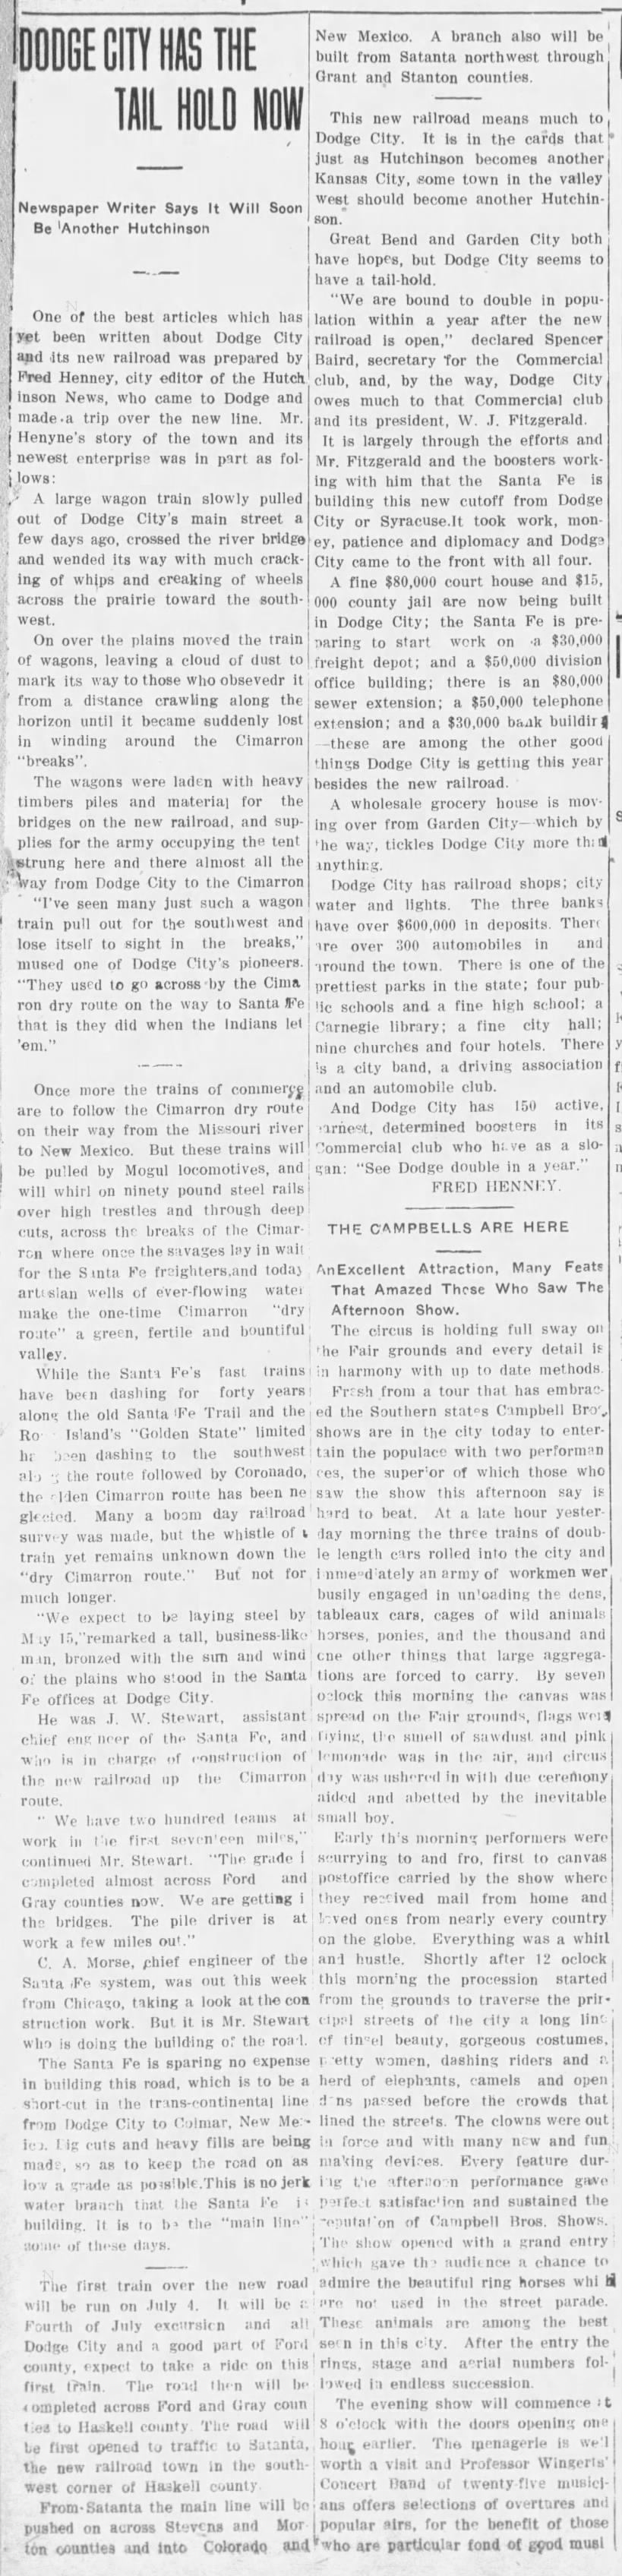 Dodge City prepares to double population as new railroad comes to town - 1912